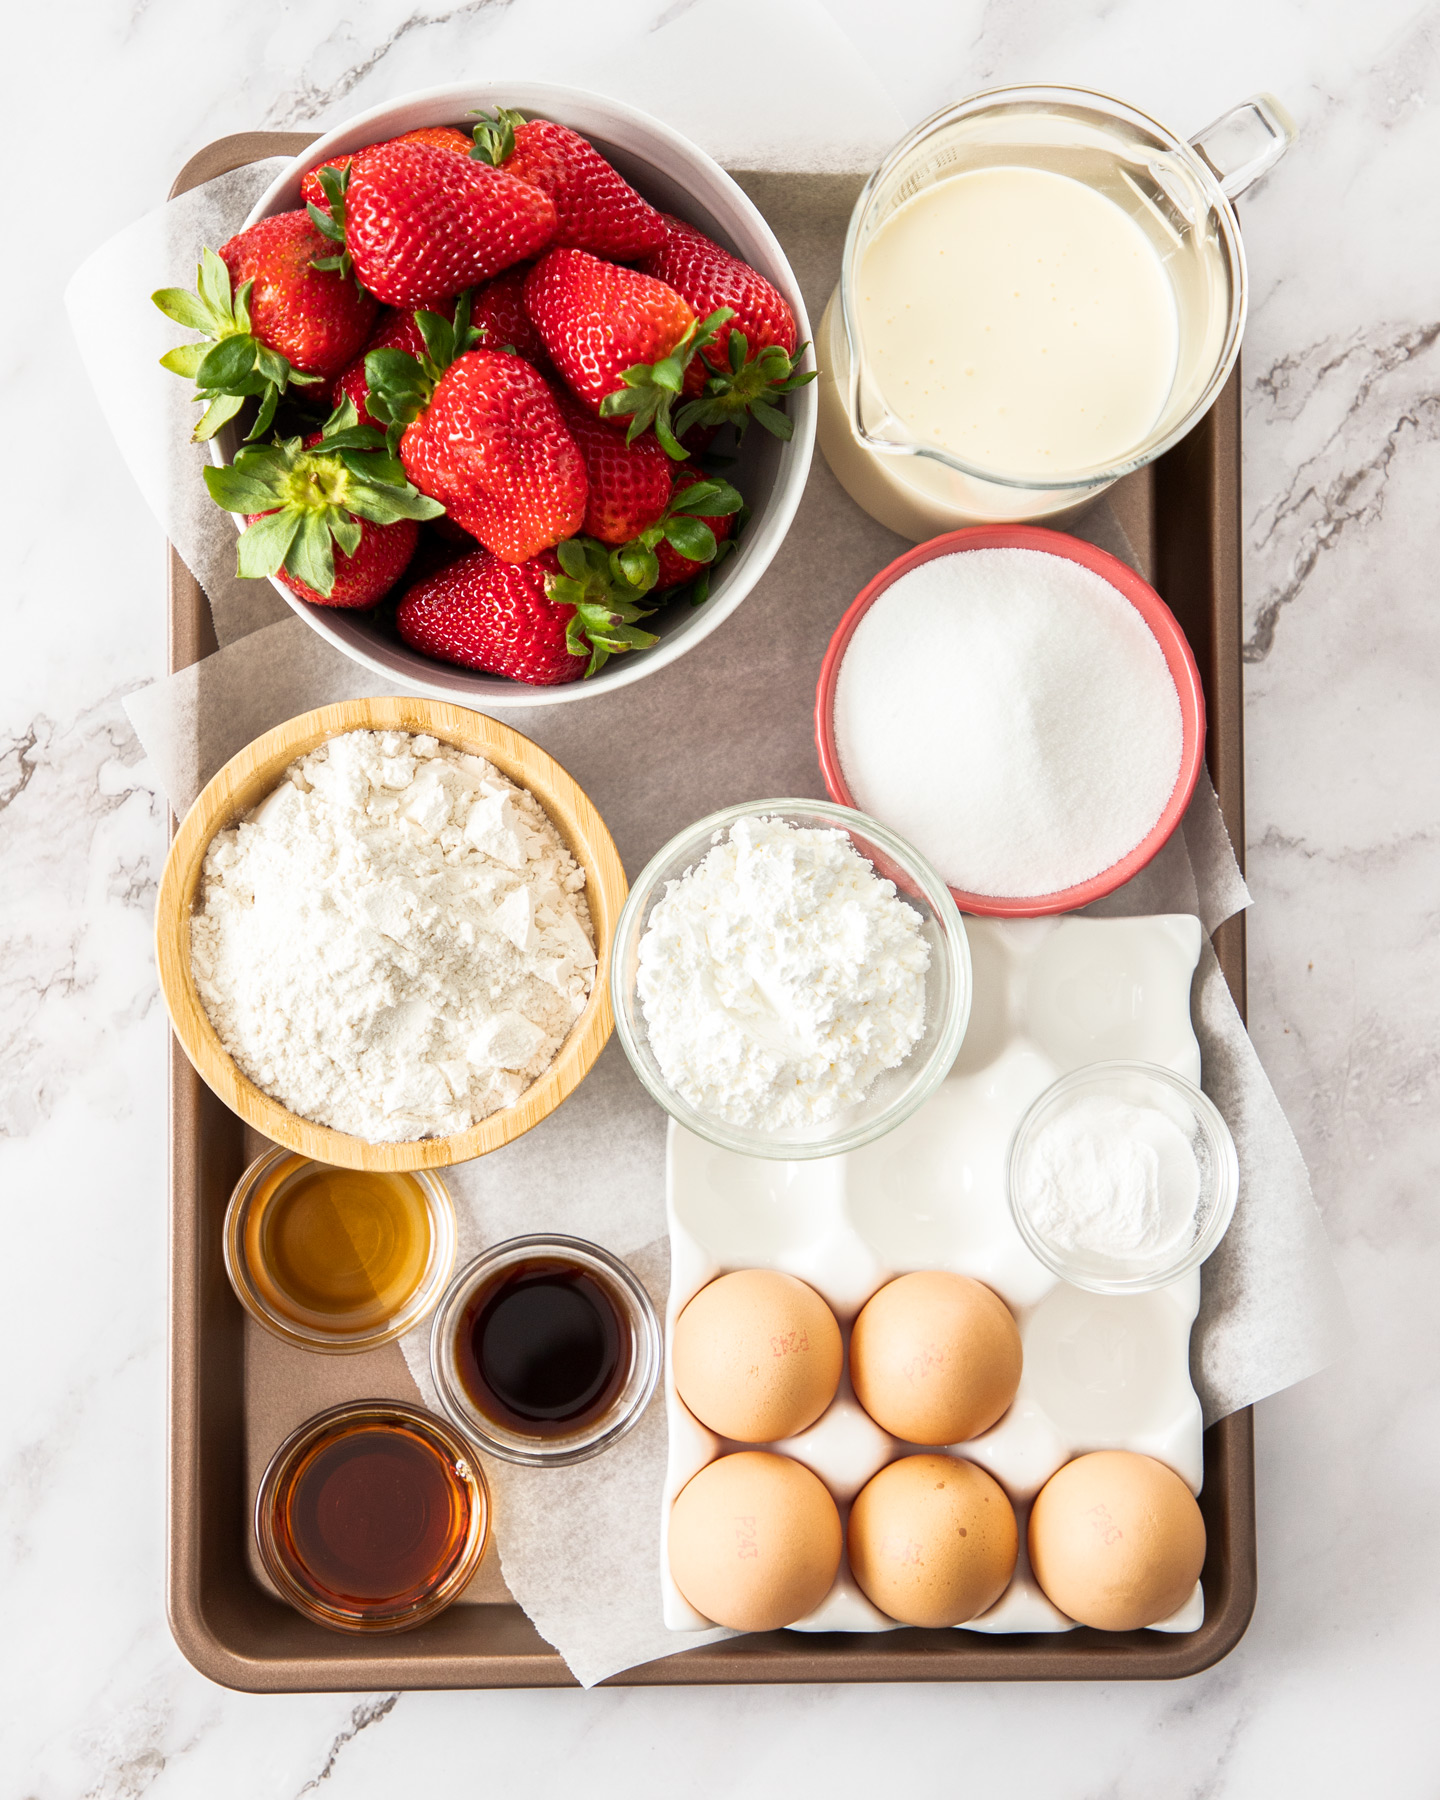 Ingredients for strawberry sponge cake on a baking tray.